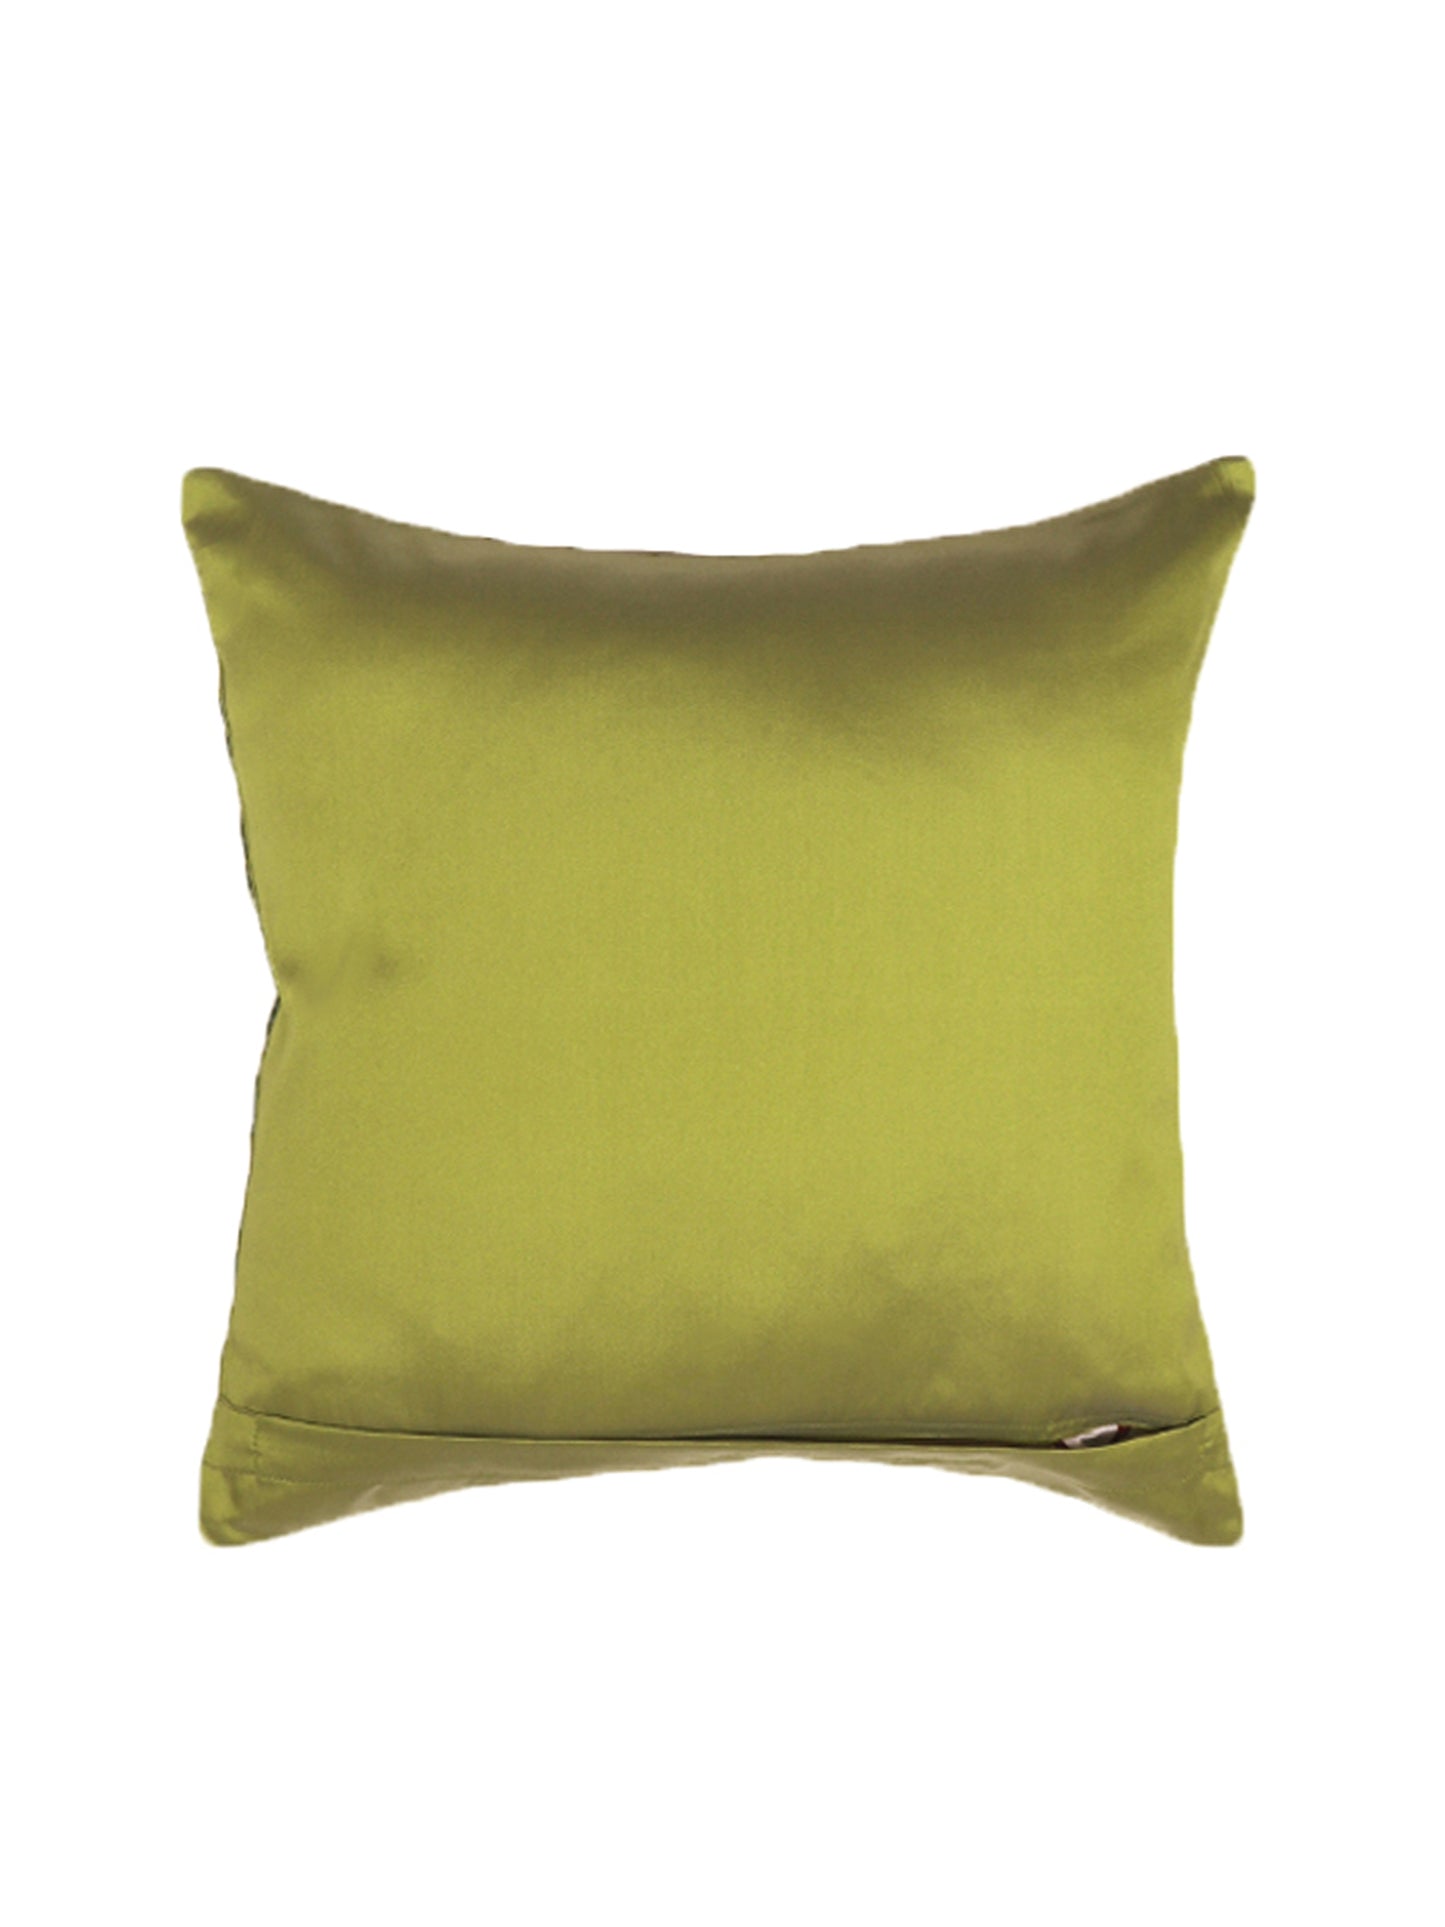 Technique Cushion Cover Set of 3 100% Polyester Shell Pleated Multi - 16" x 16"